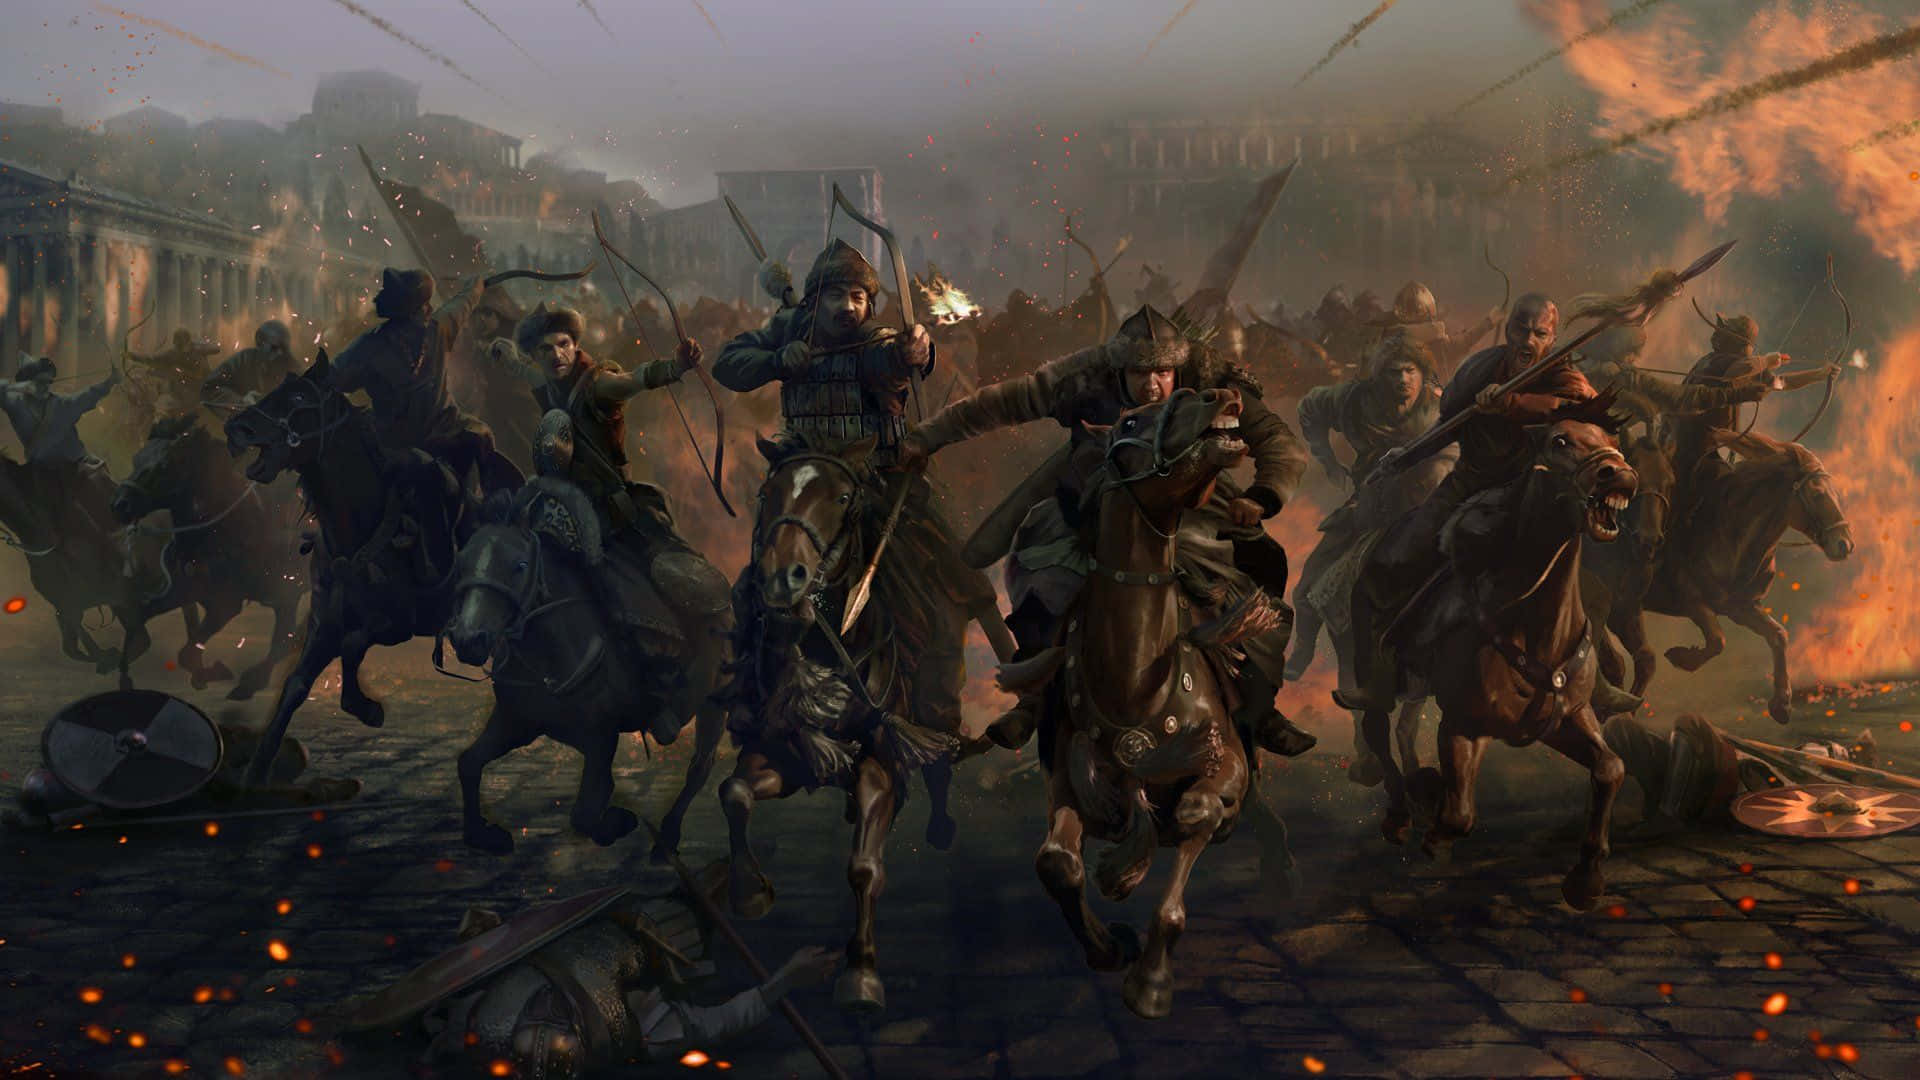 A Group Of Men On Horses In A City Wallpaper